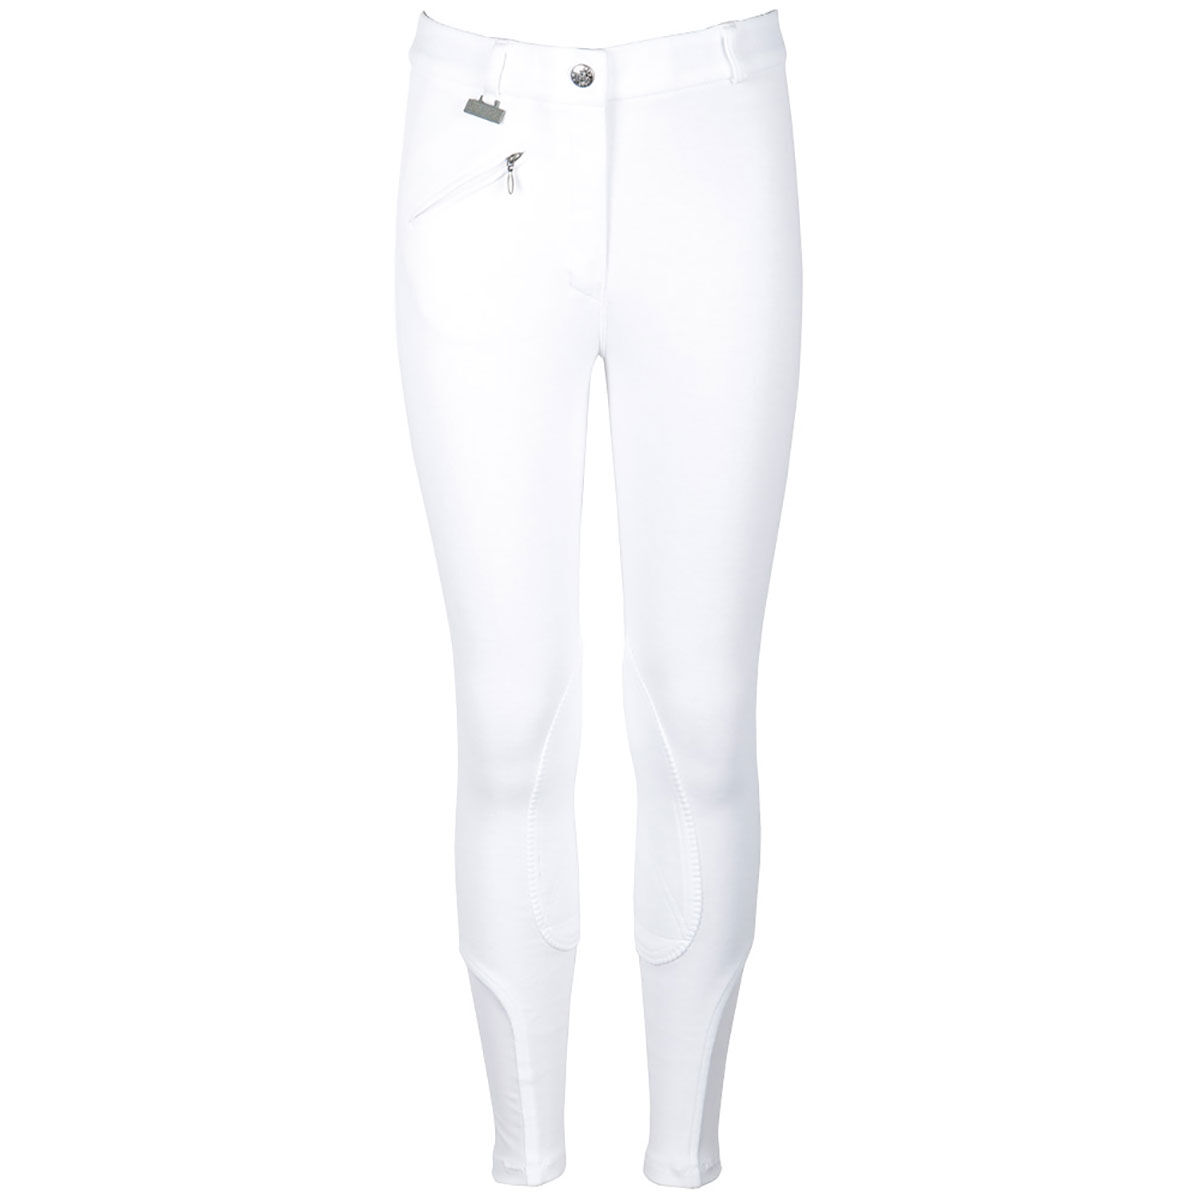 Harrys Horse Ladies Breeches Youn GRIDER Age 11 to 12 Reithose Youngrider 146 Womens